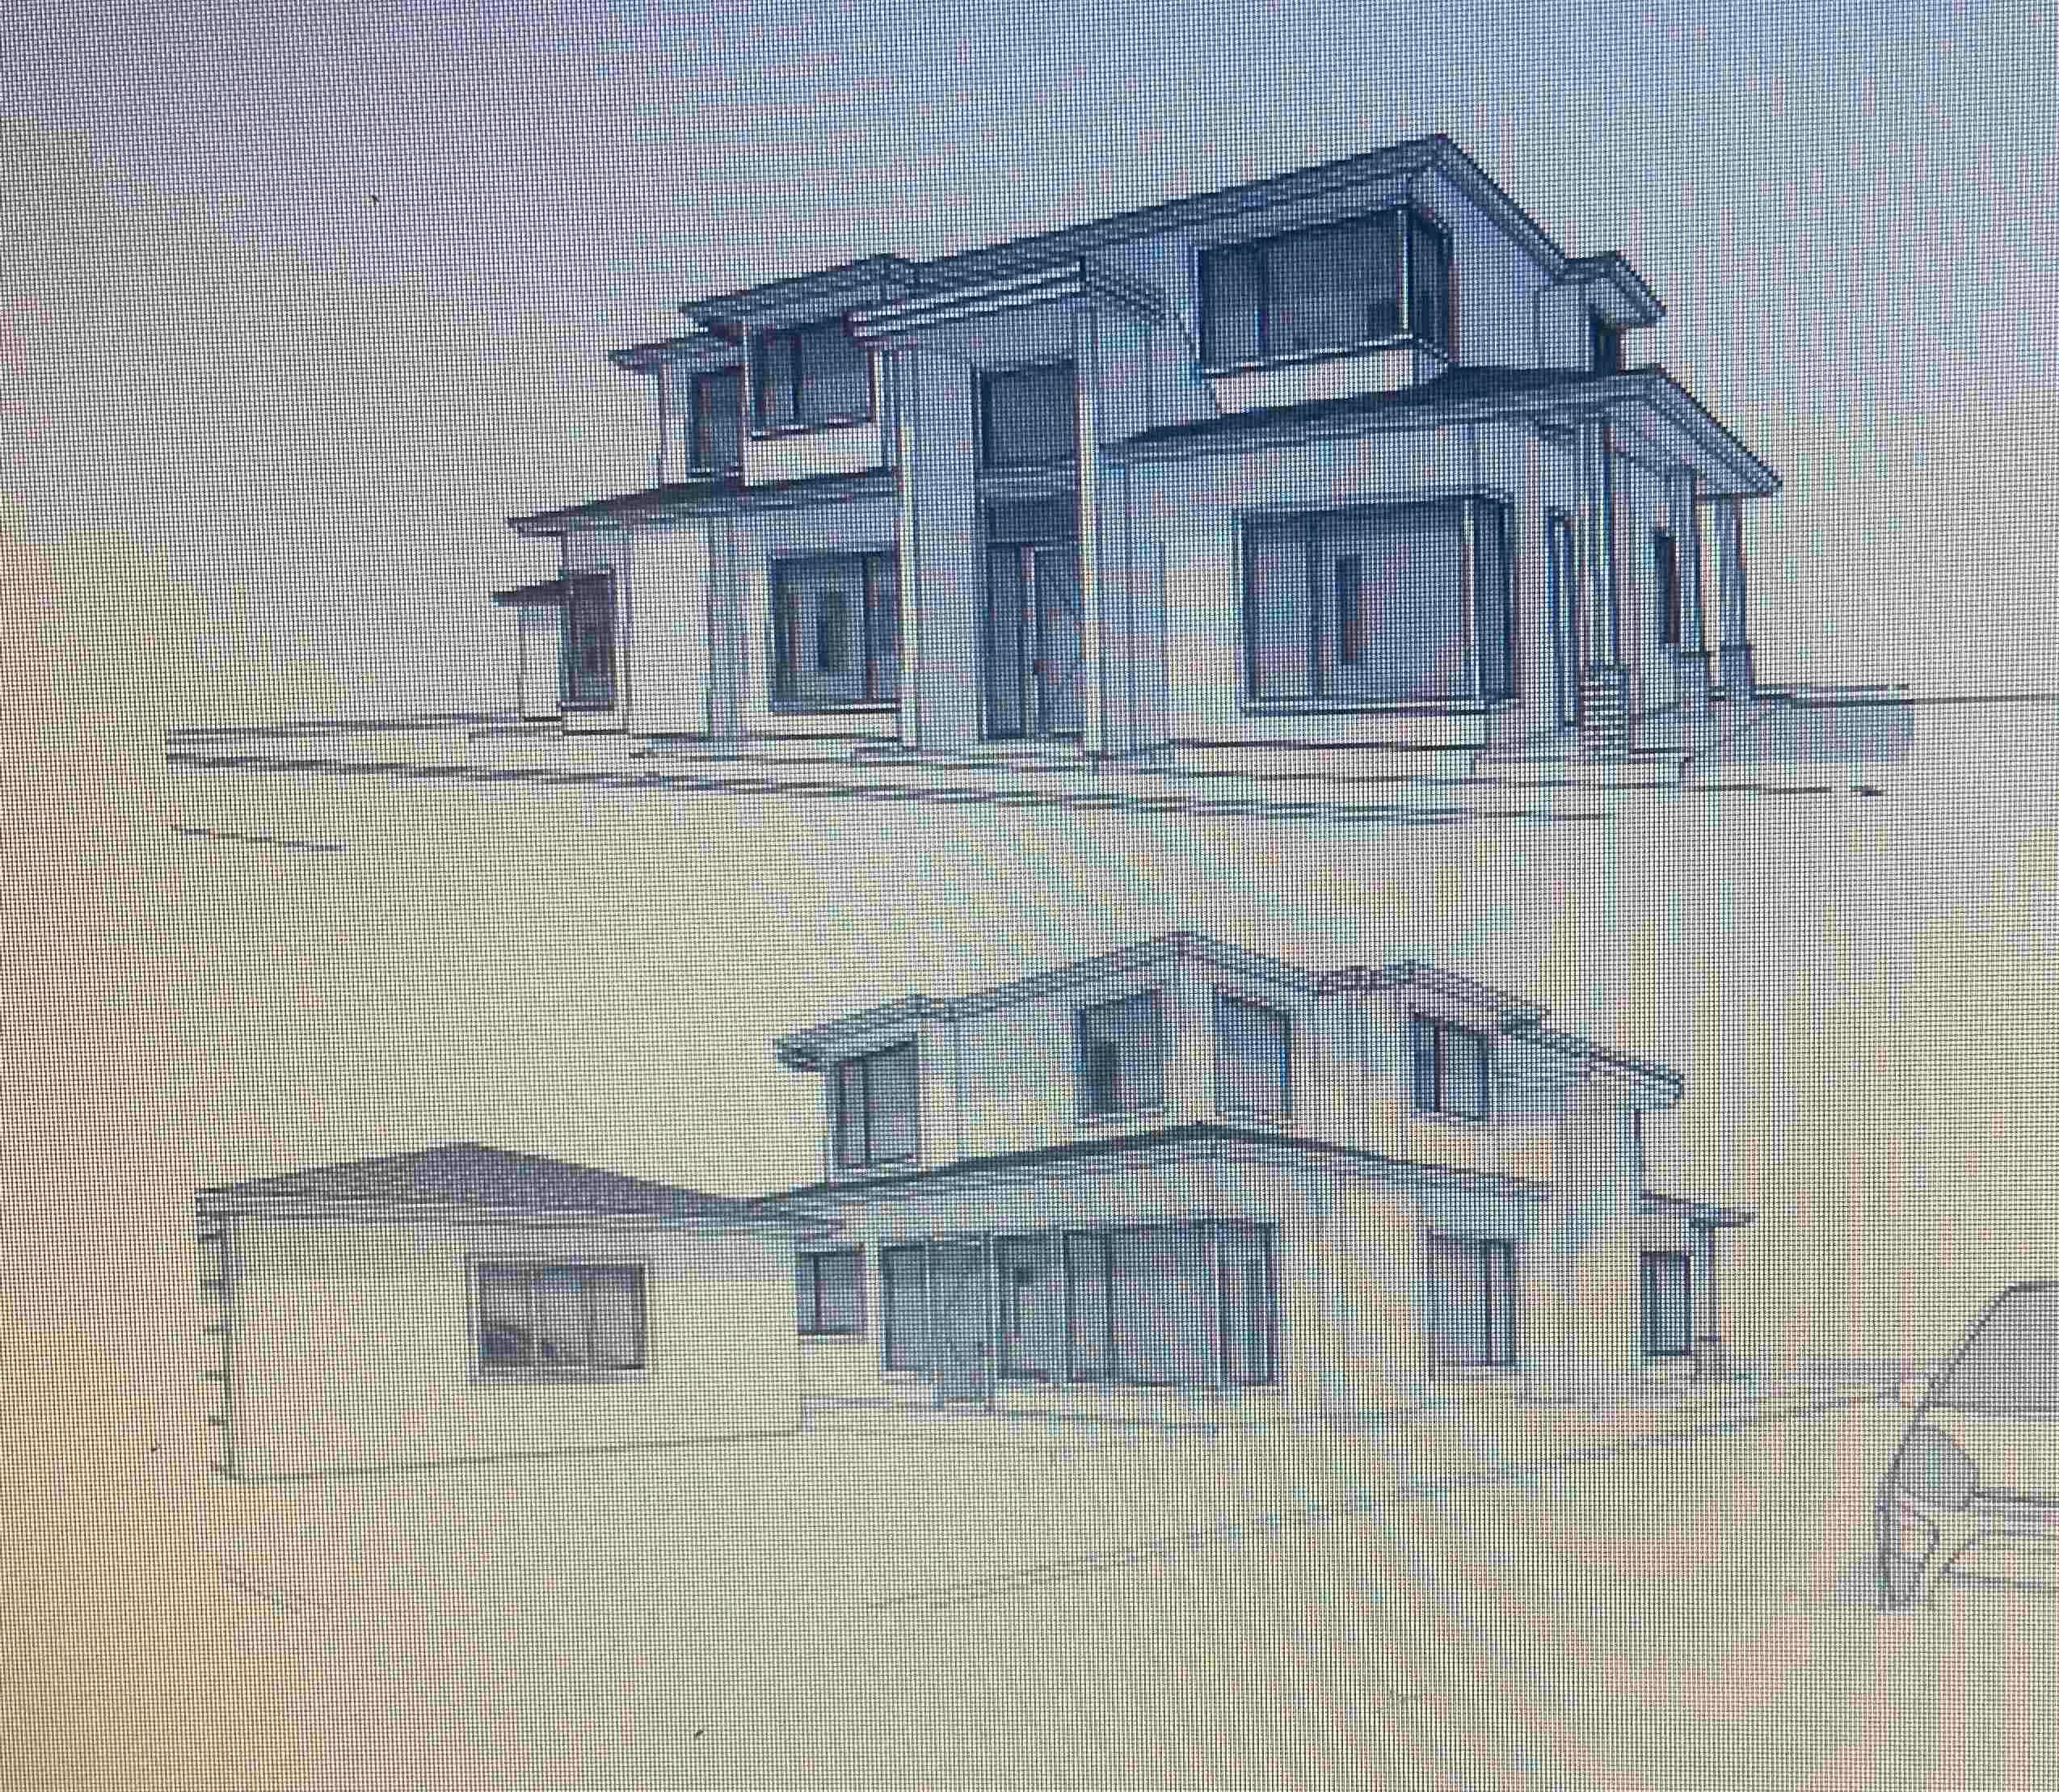 Elevation of New Home